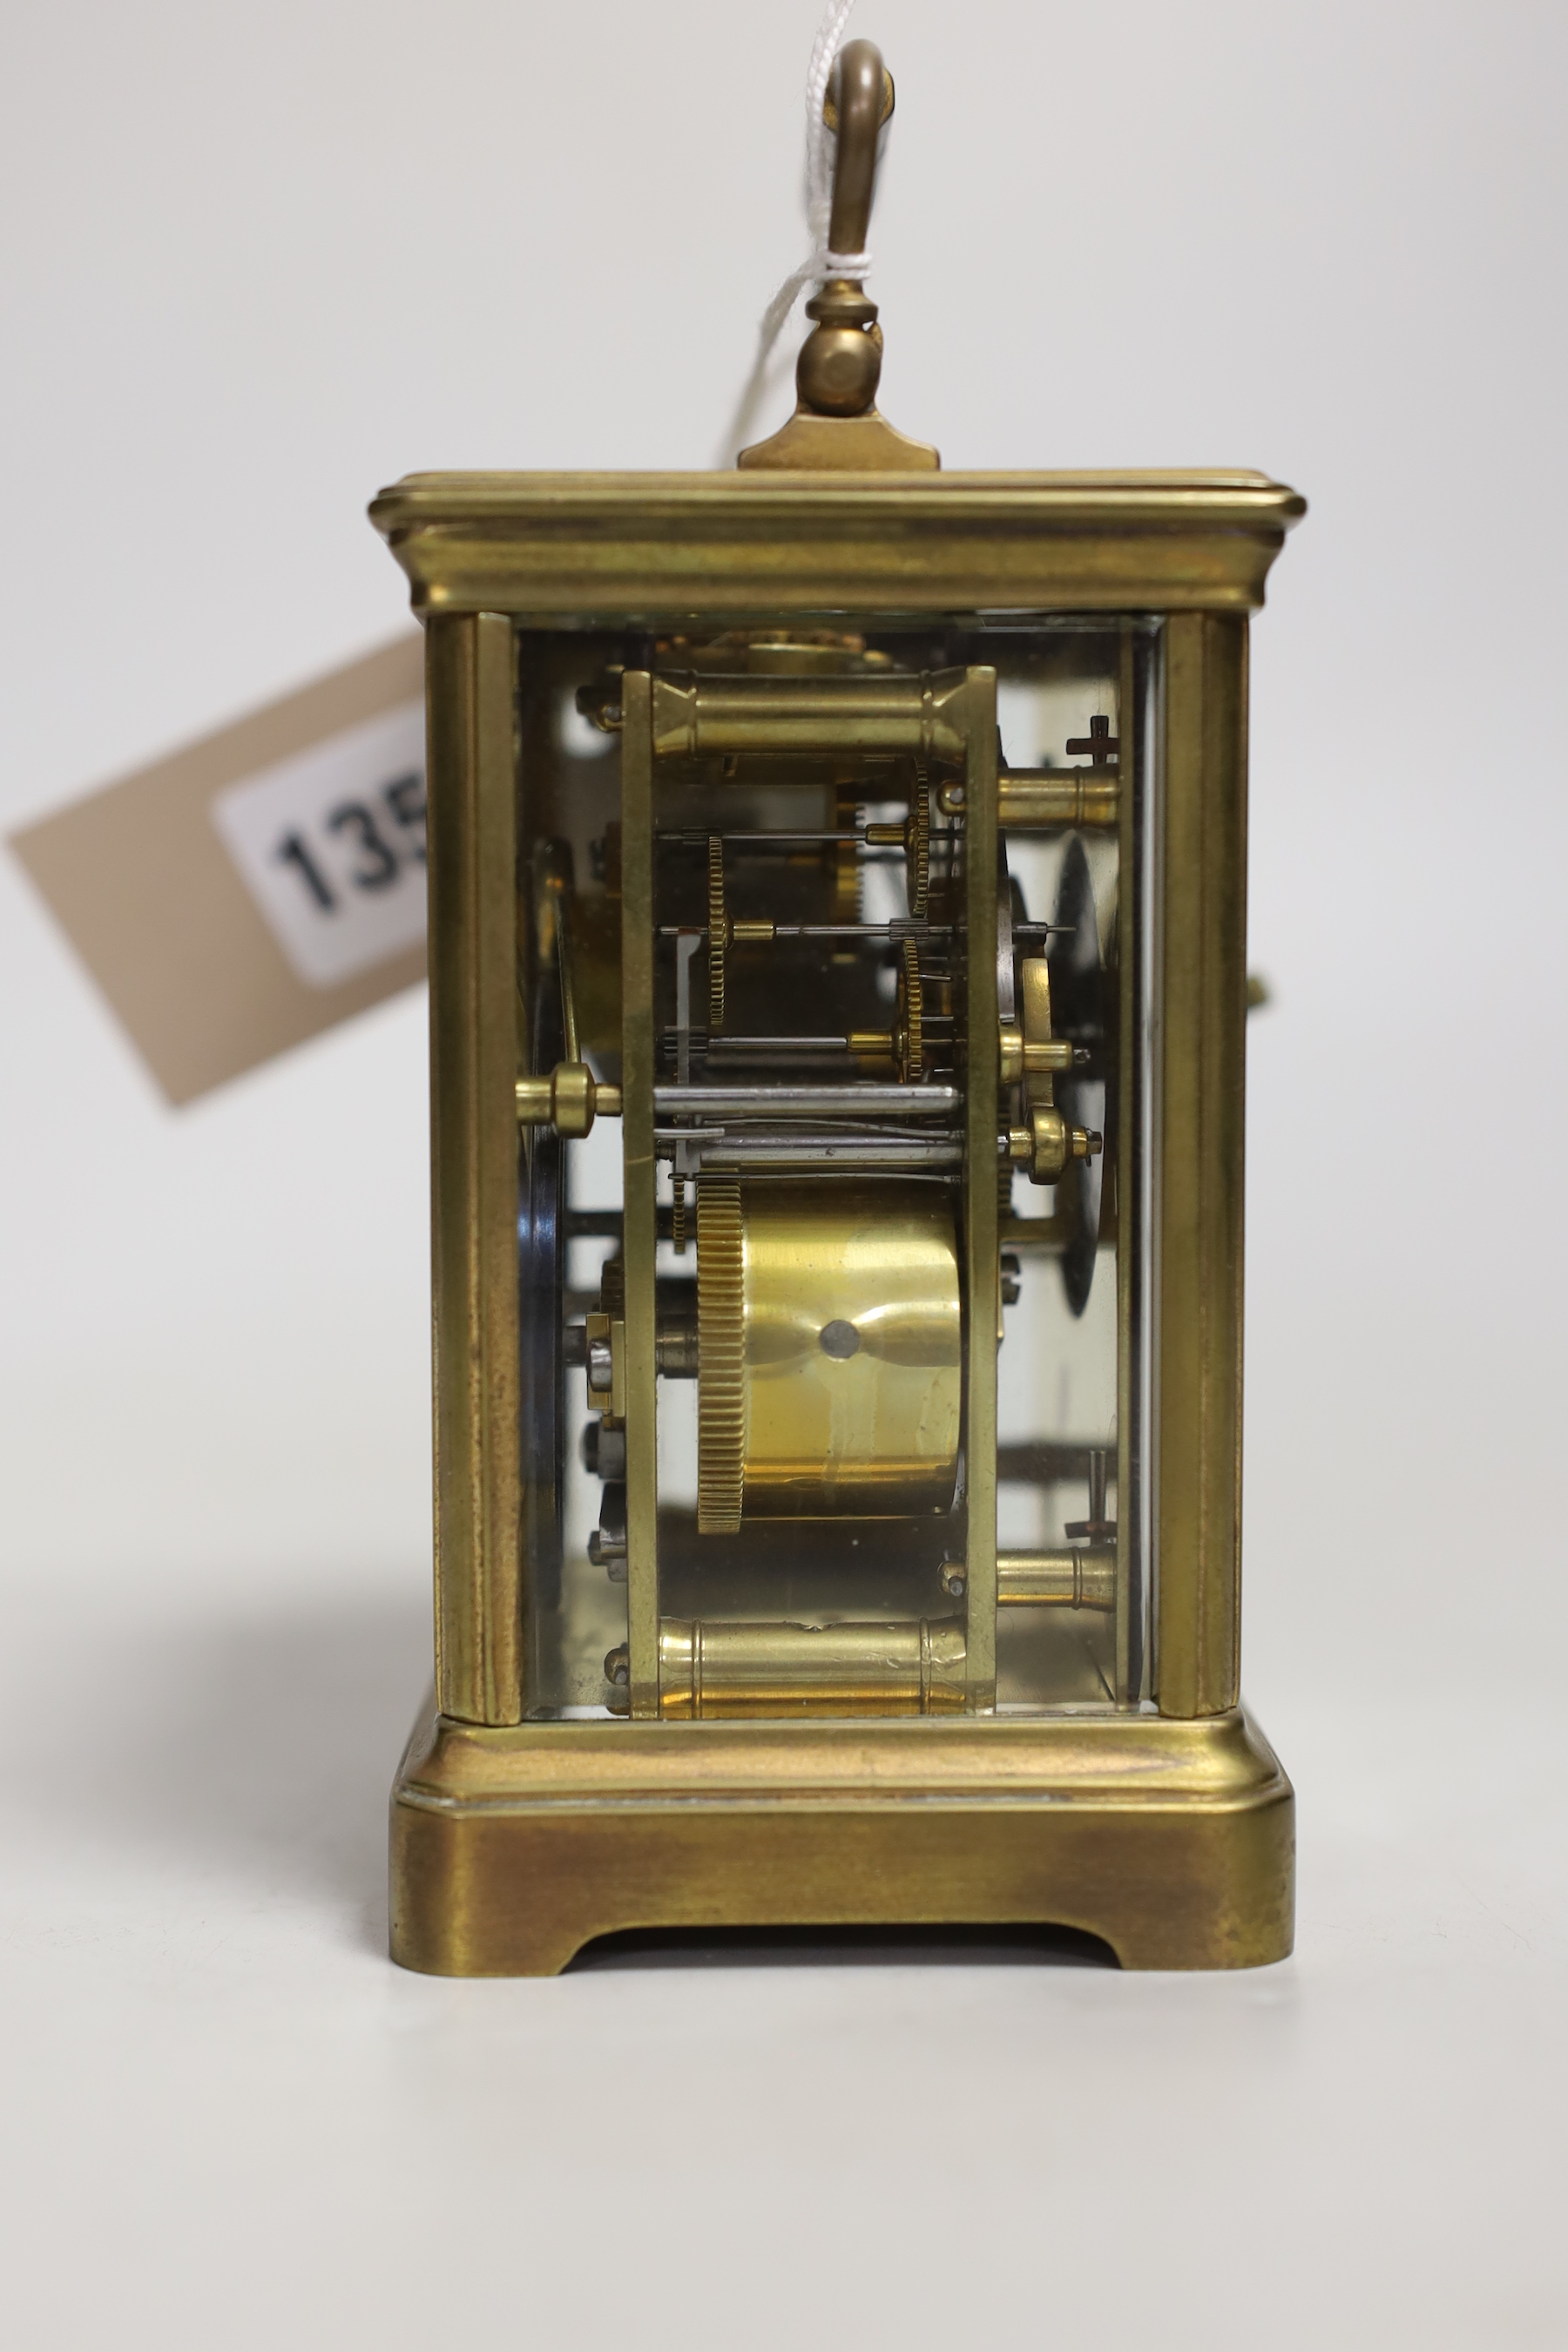 A brass carriage clock and a silver watch, clock 12cm high